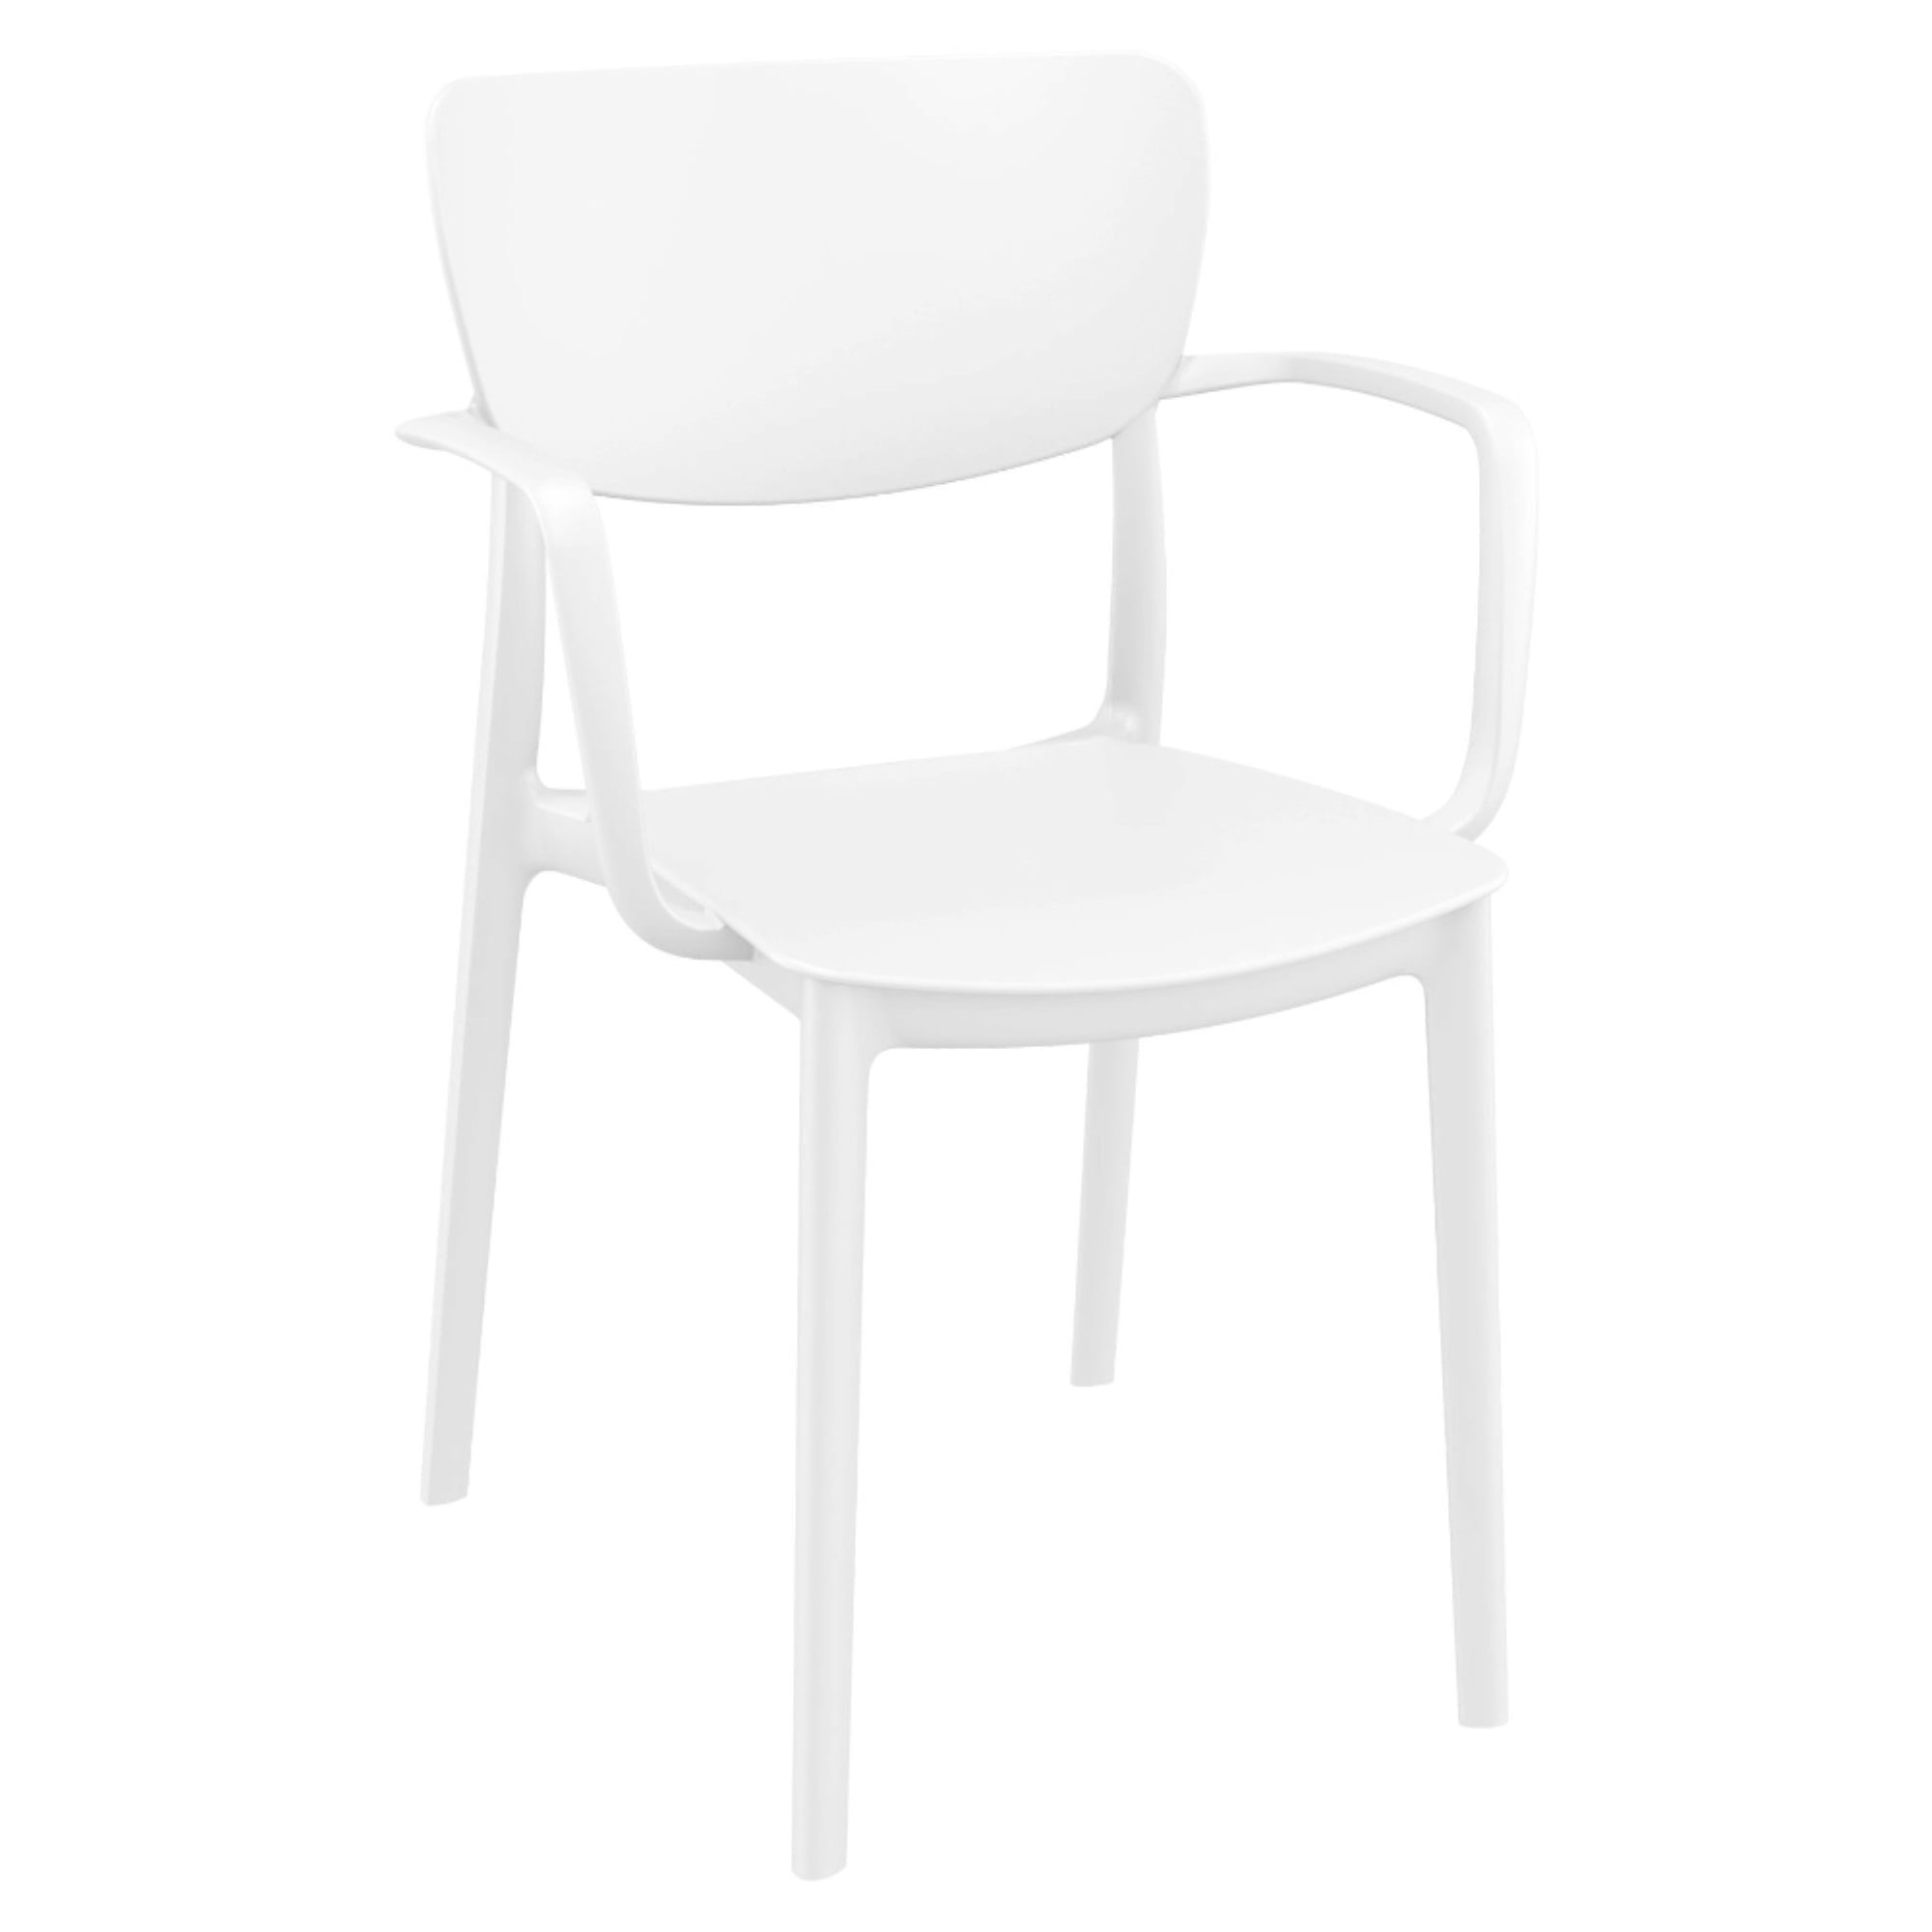 Isp126-whi 32.3 X 17.7 X 21 In. Lisa Outdoor Dining Arm Chair, White